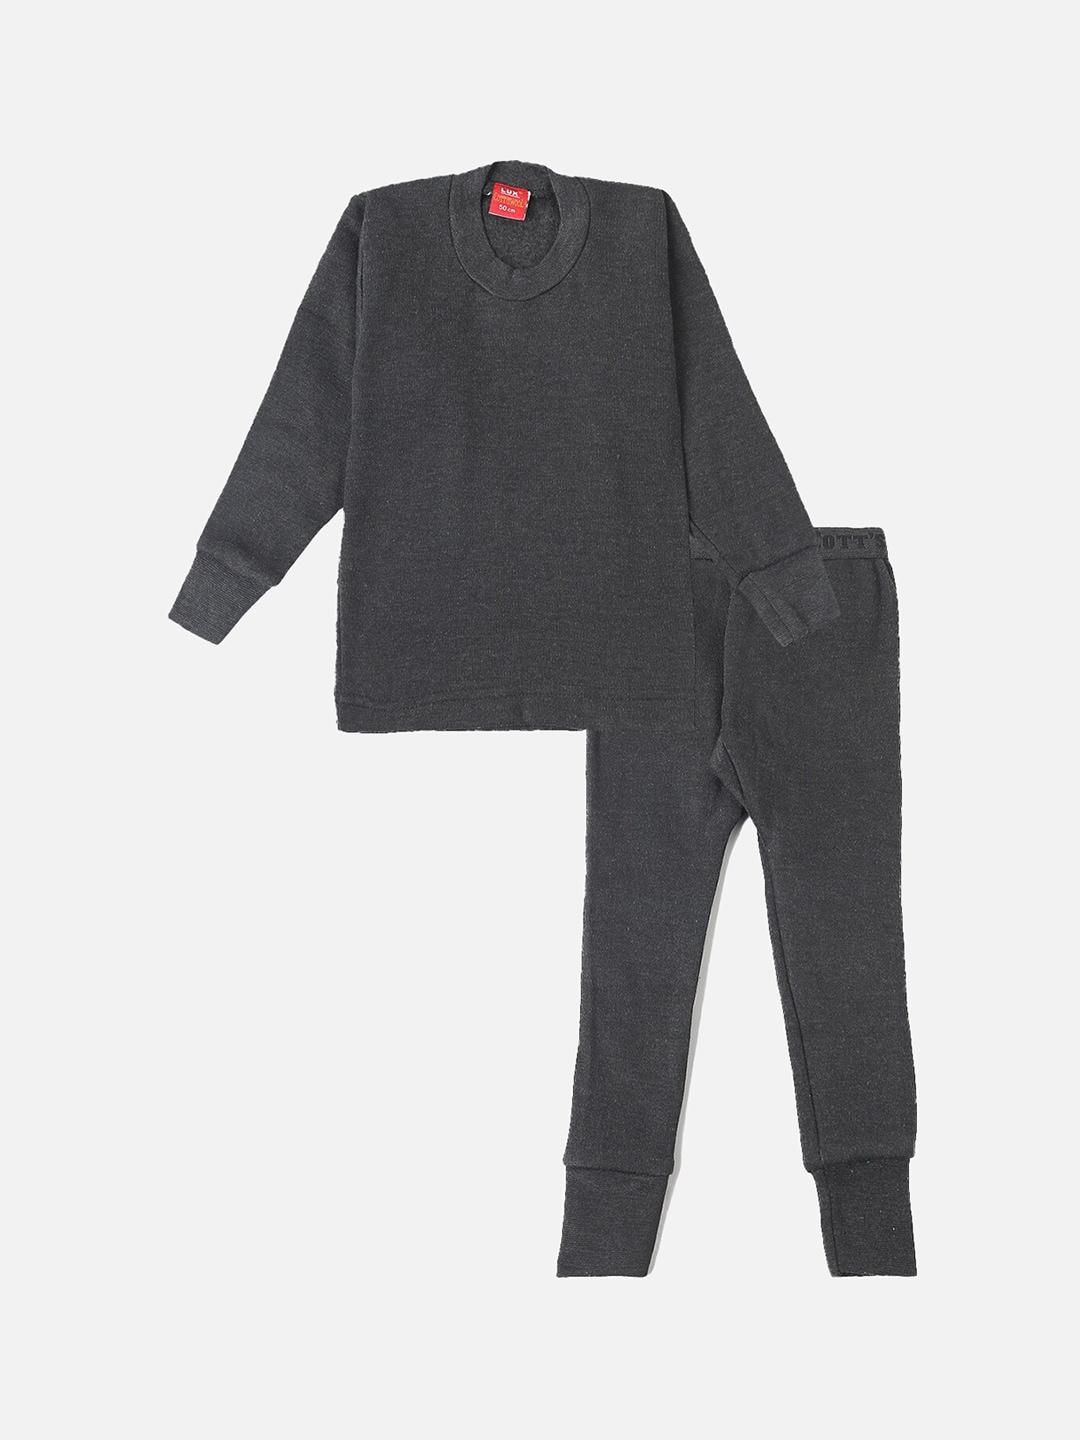 Lux Cottswool Boys Black Solid Cotton Slim-Fit Thermal Set